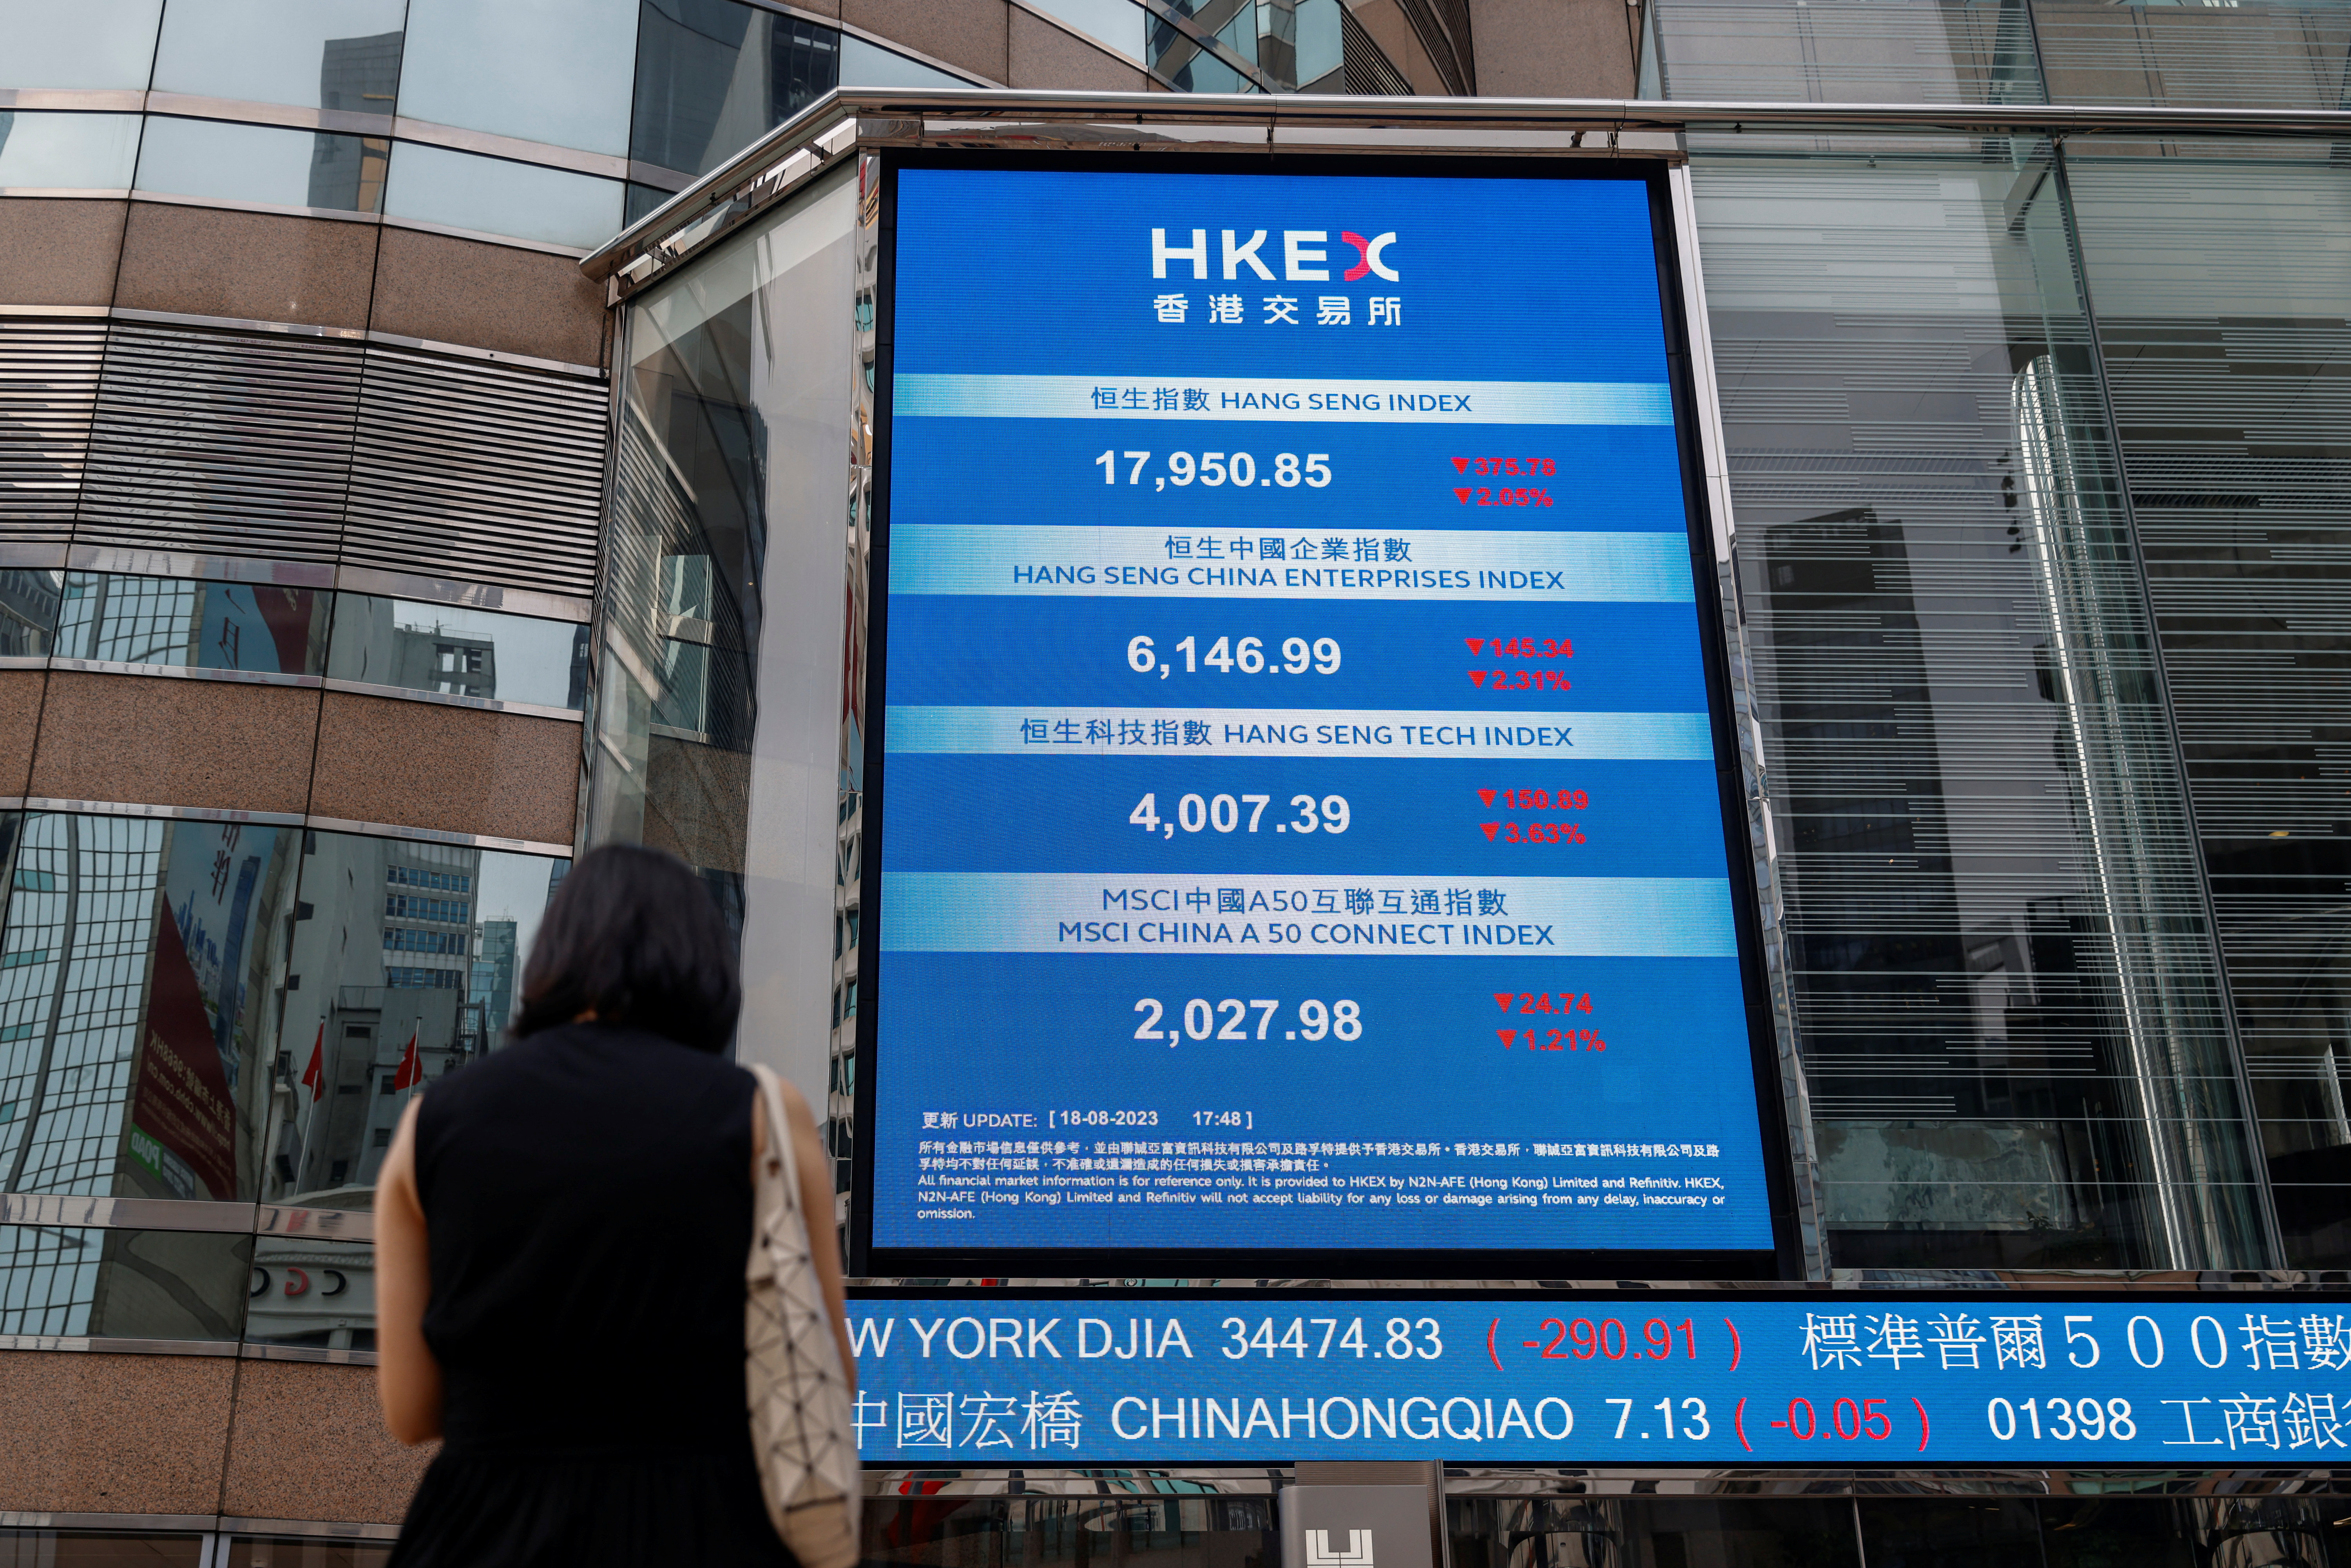 A screen showing the Hang Seng stock index is seen outside Exchange Square, in Hong Kong